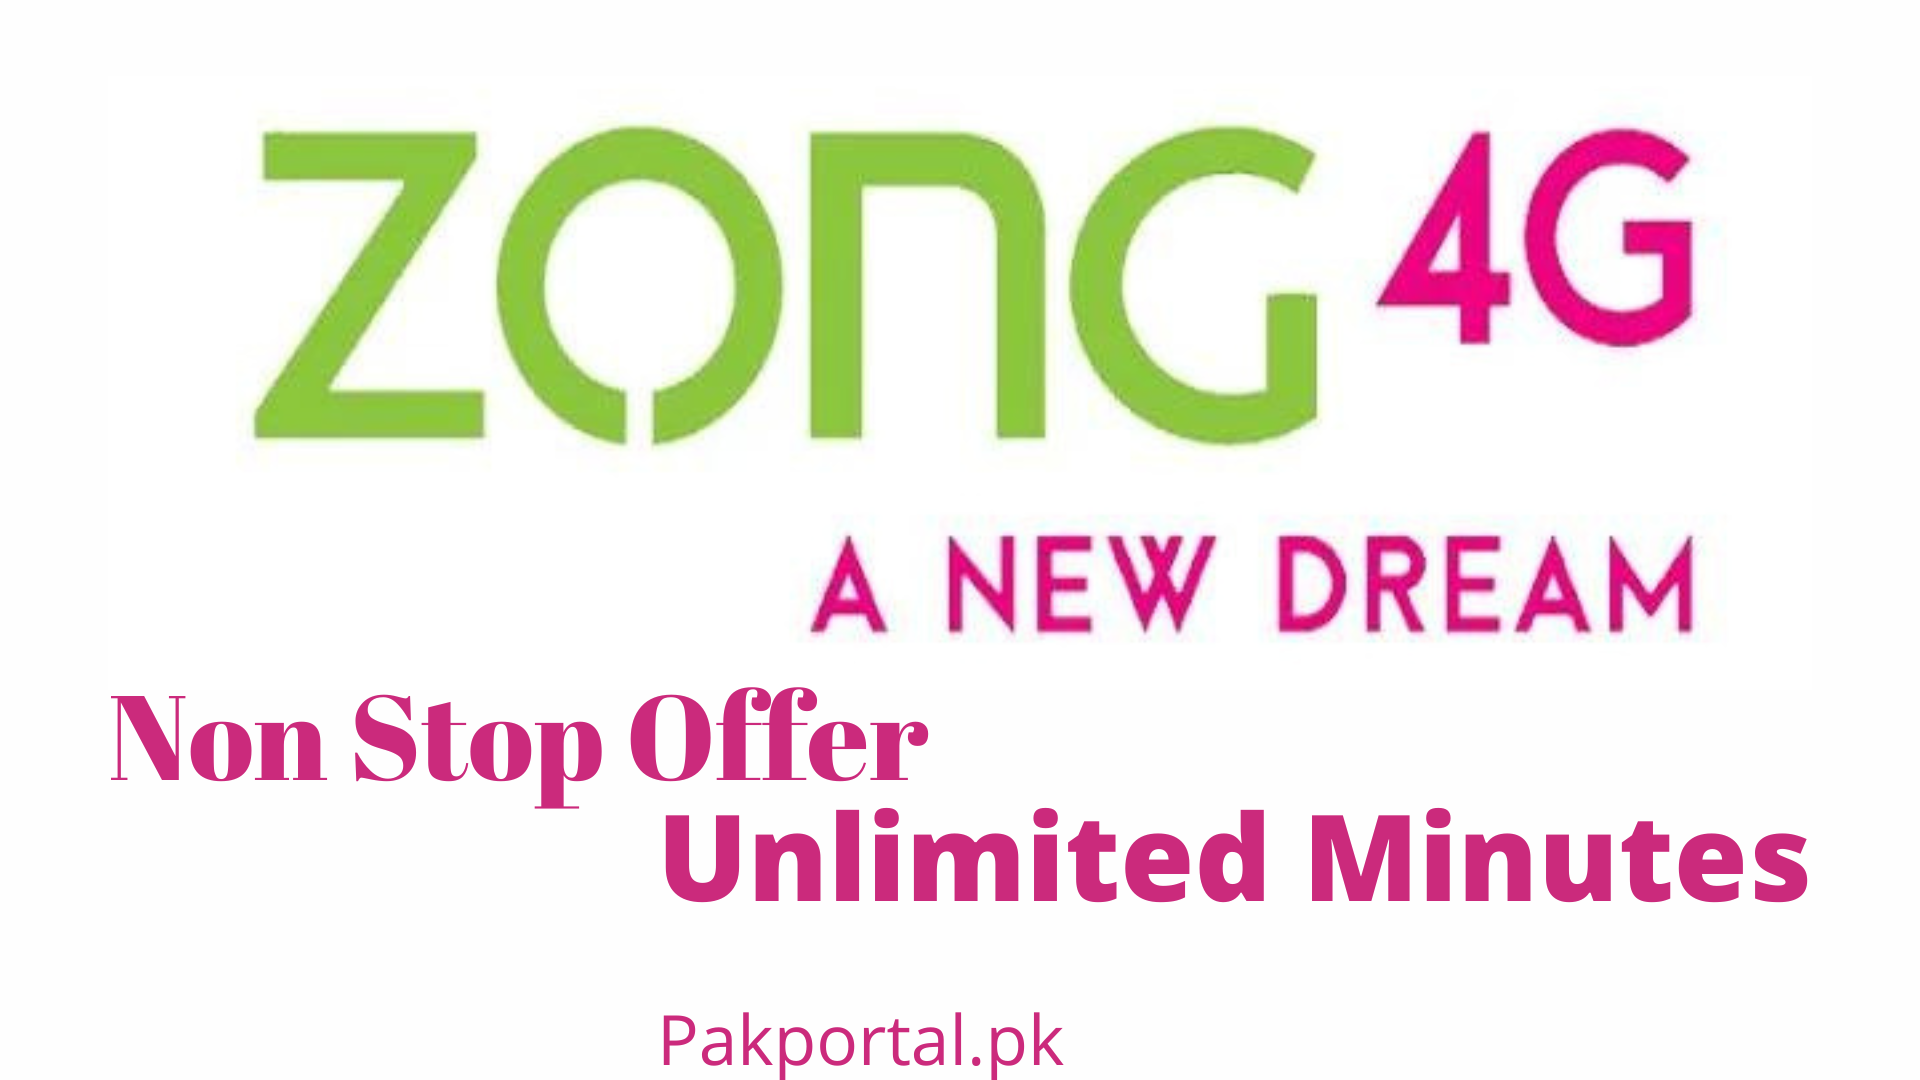 Zong Non-Stop Package